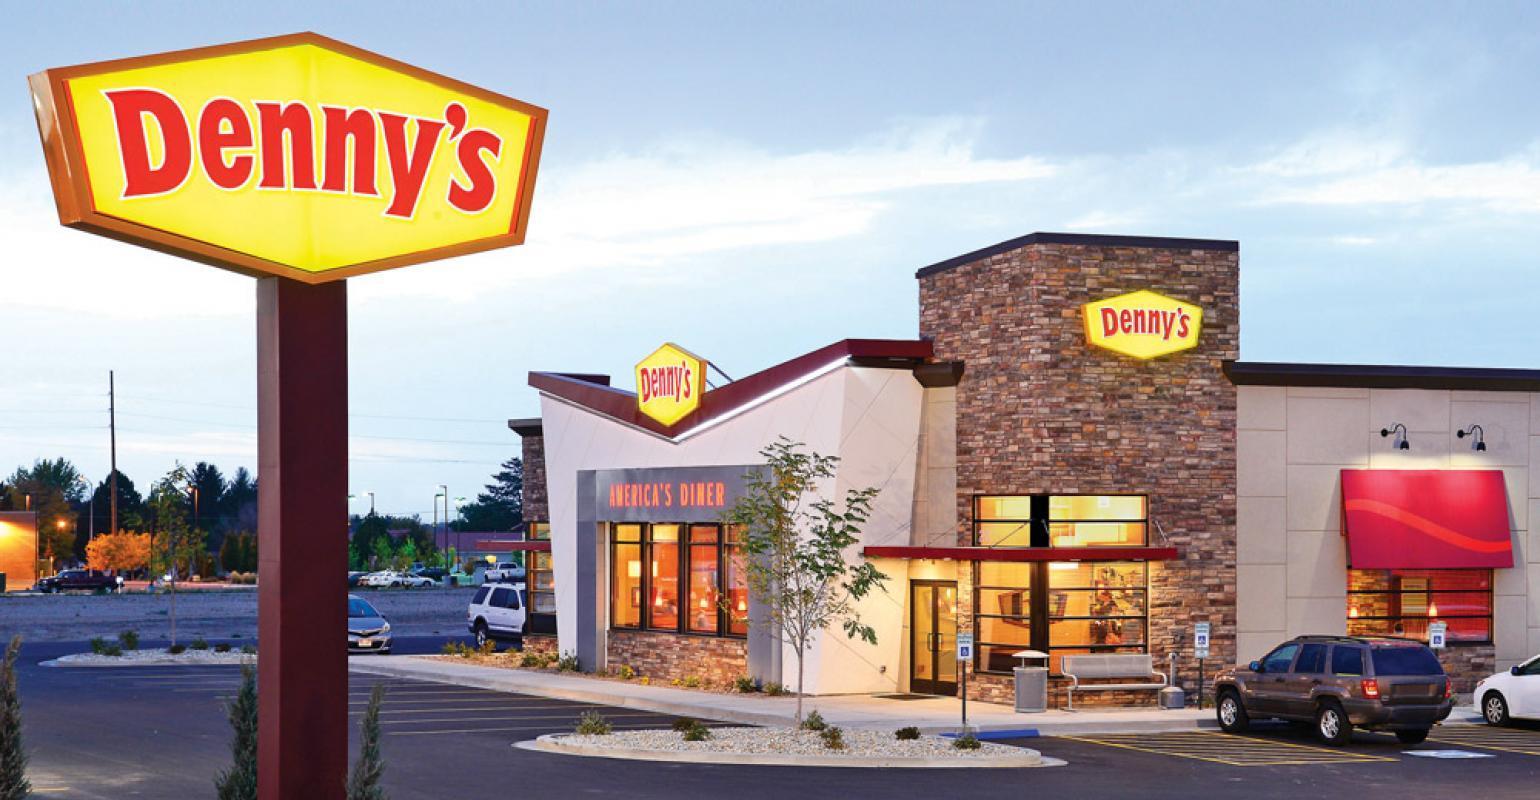 Denny's presses franchisees with 'carrots and sticks' to stay open